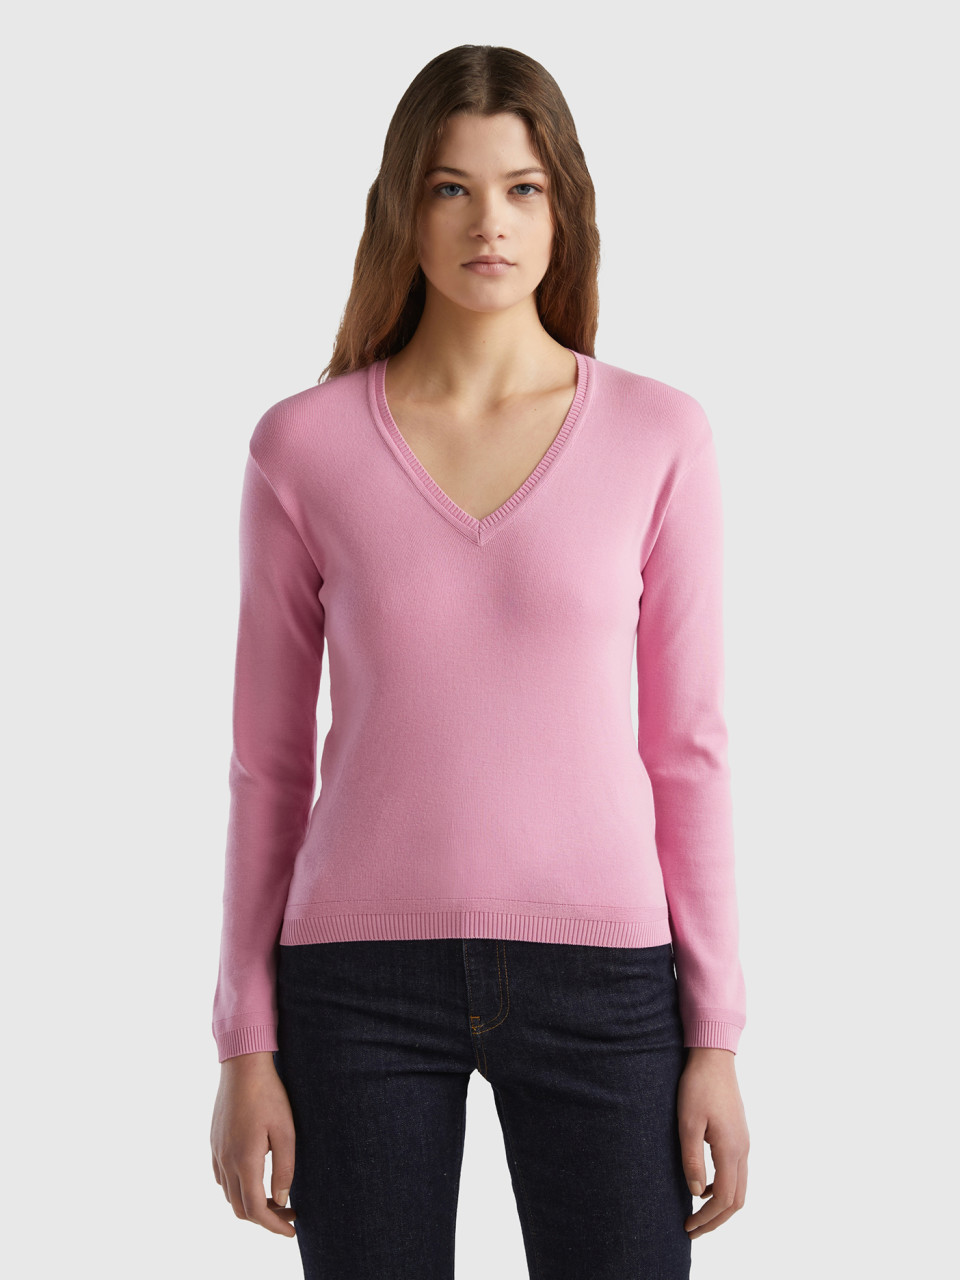 Benetton, V-neck Sweater In Pure Cotton, Pastel Pink, Women